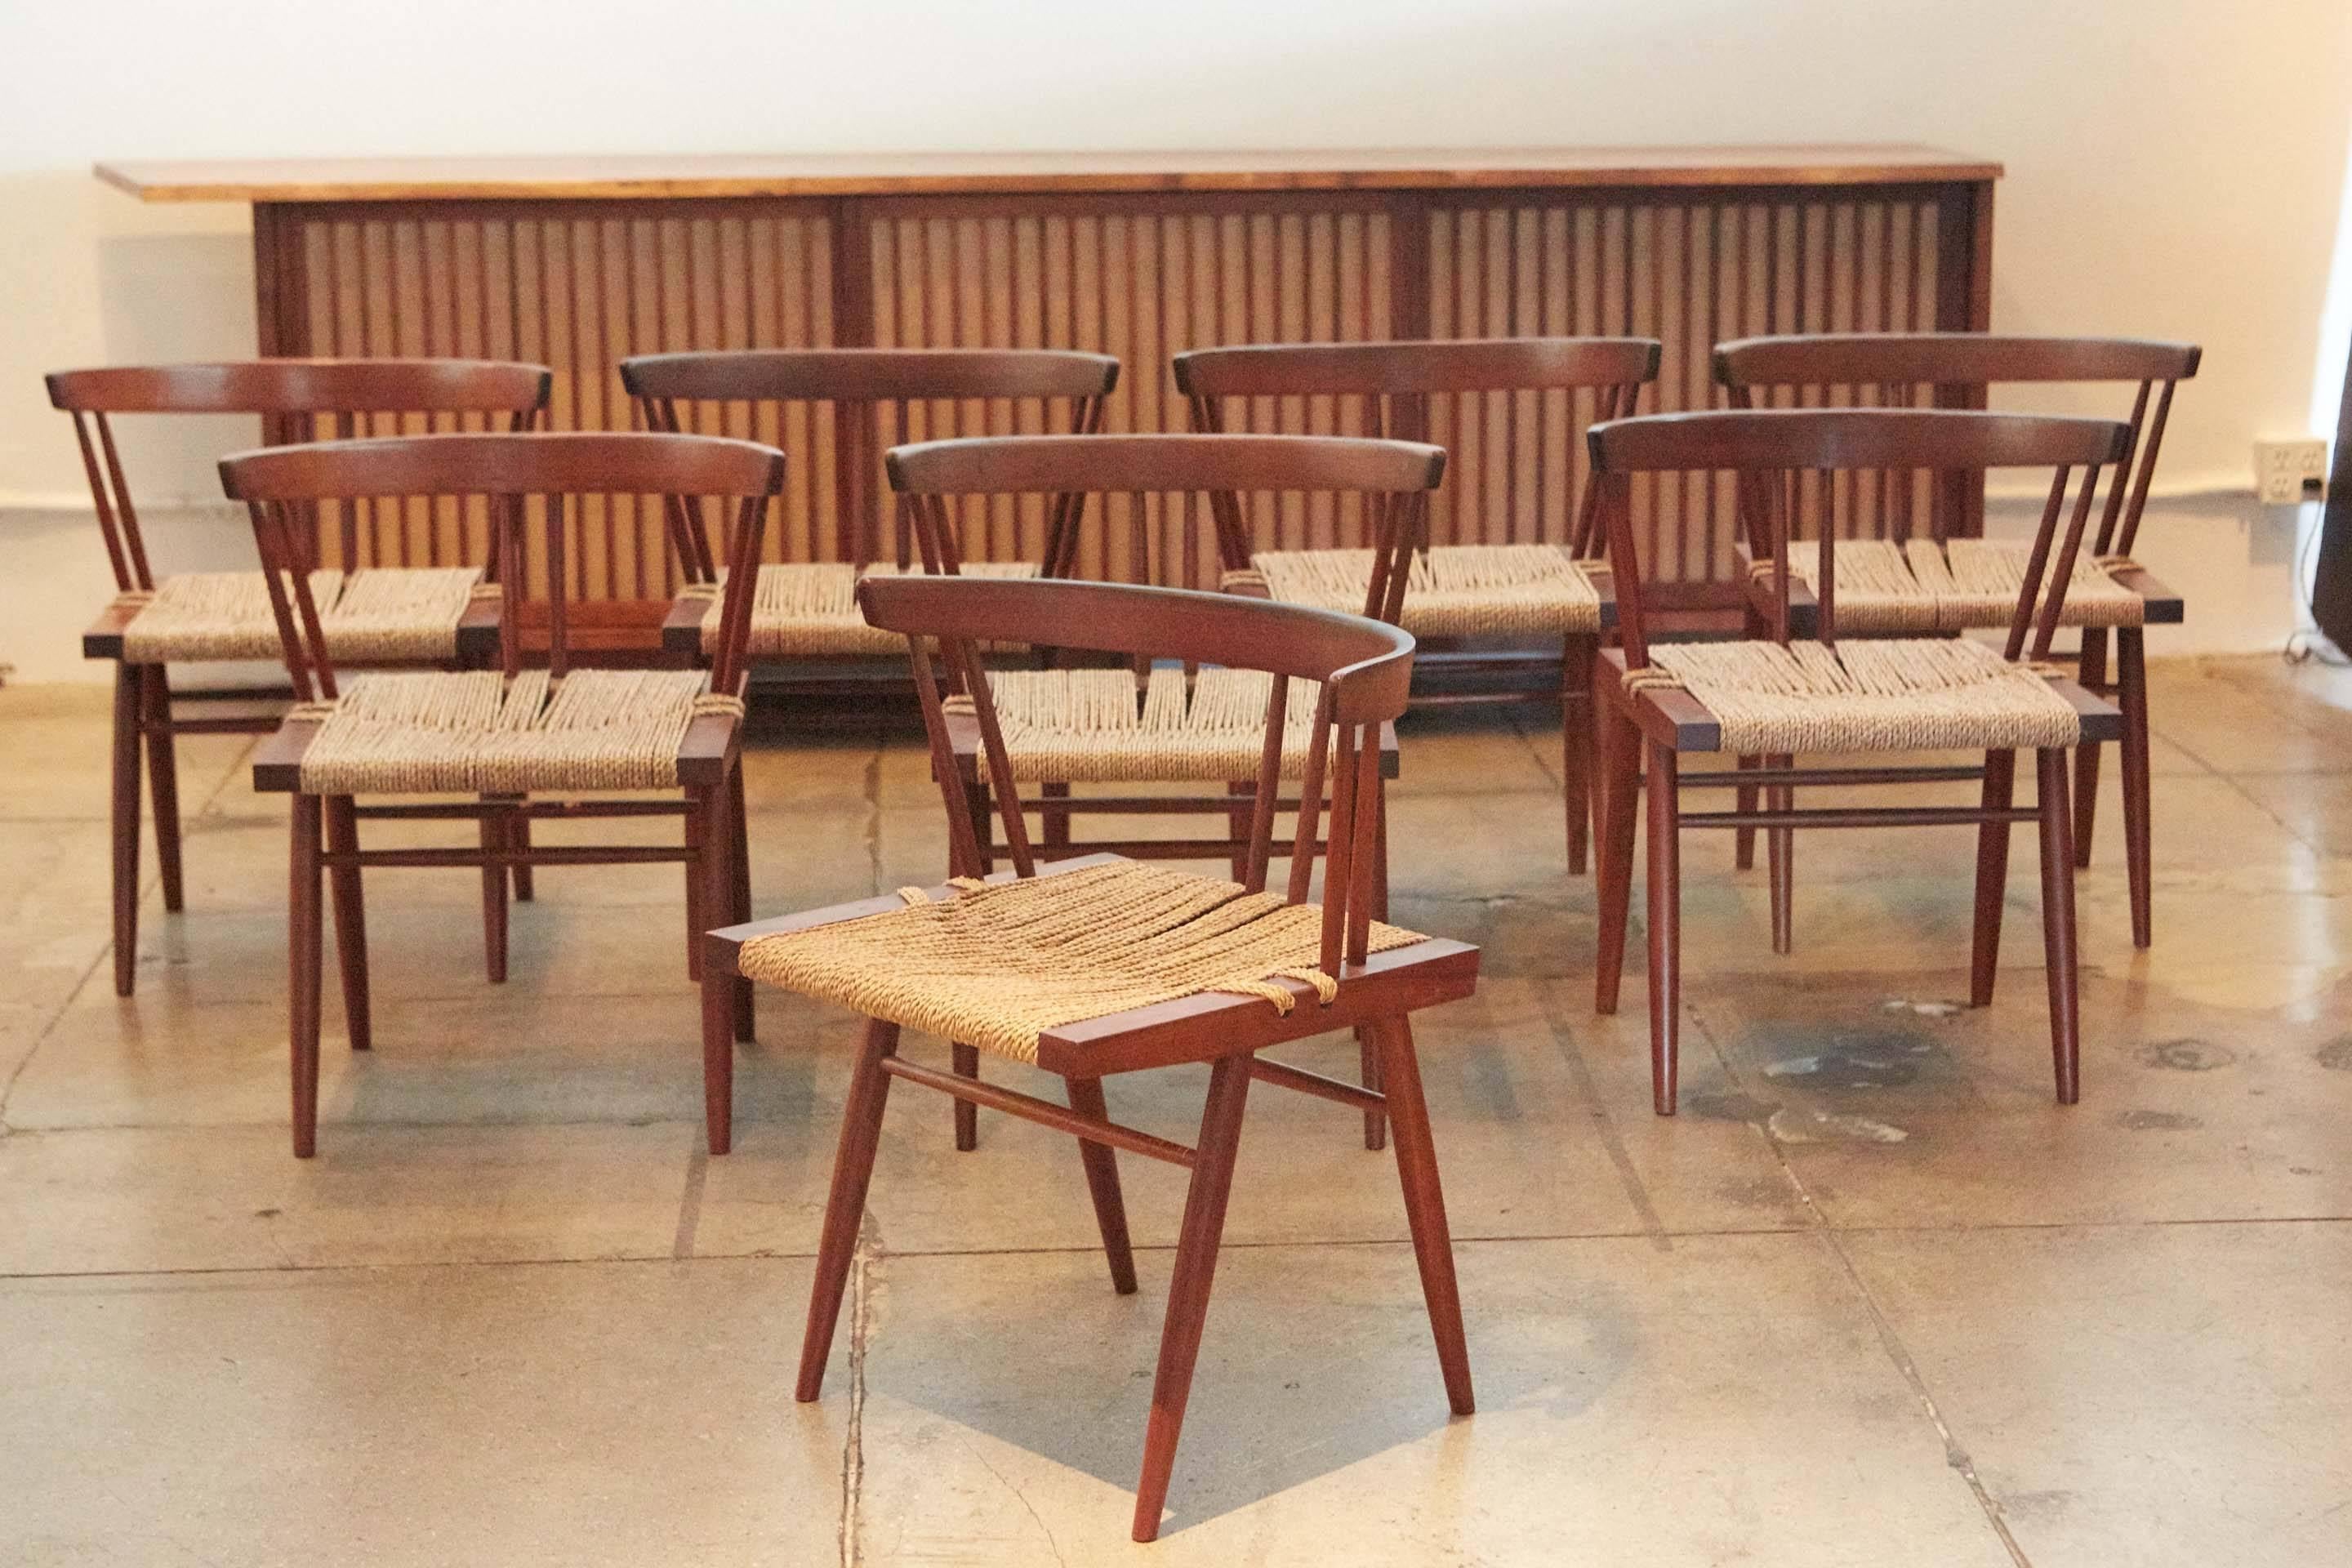 American Set of 12 Grass Seat Chairs by George Nakashima, New Hope, Pennsylvania